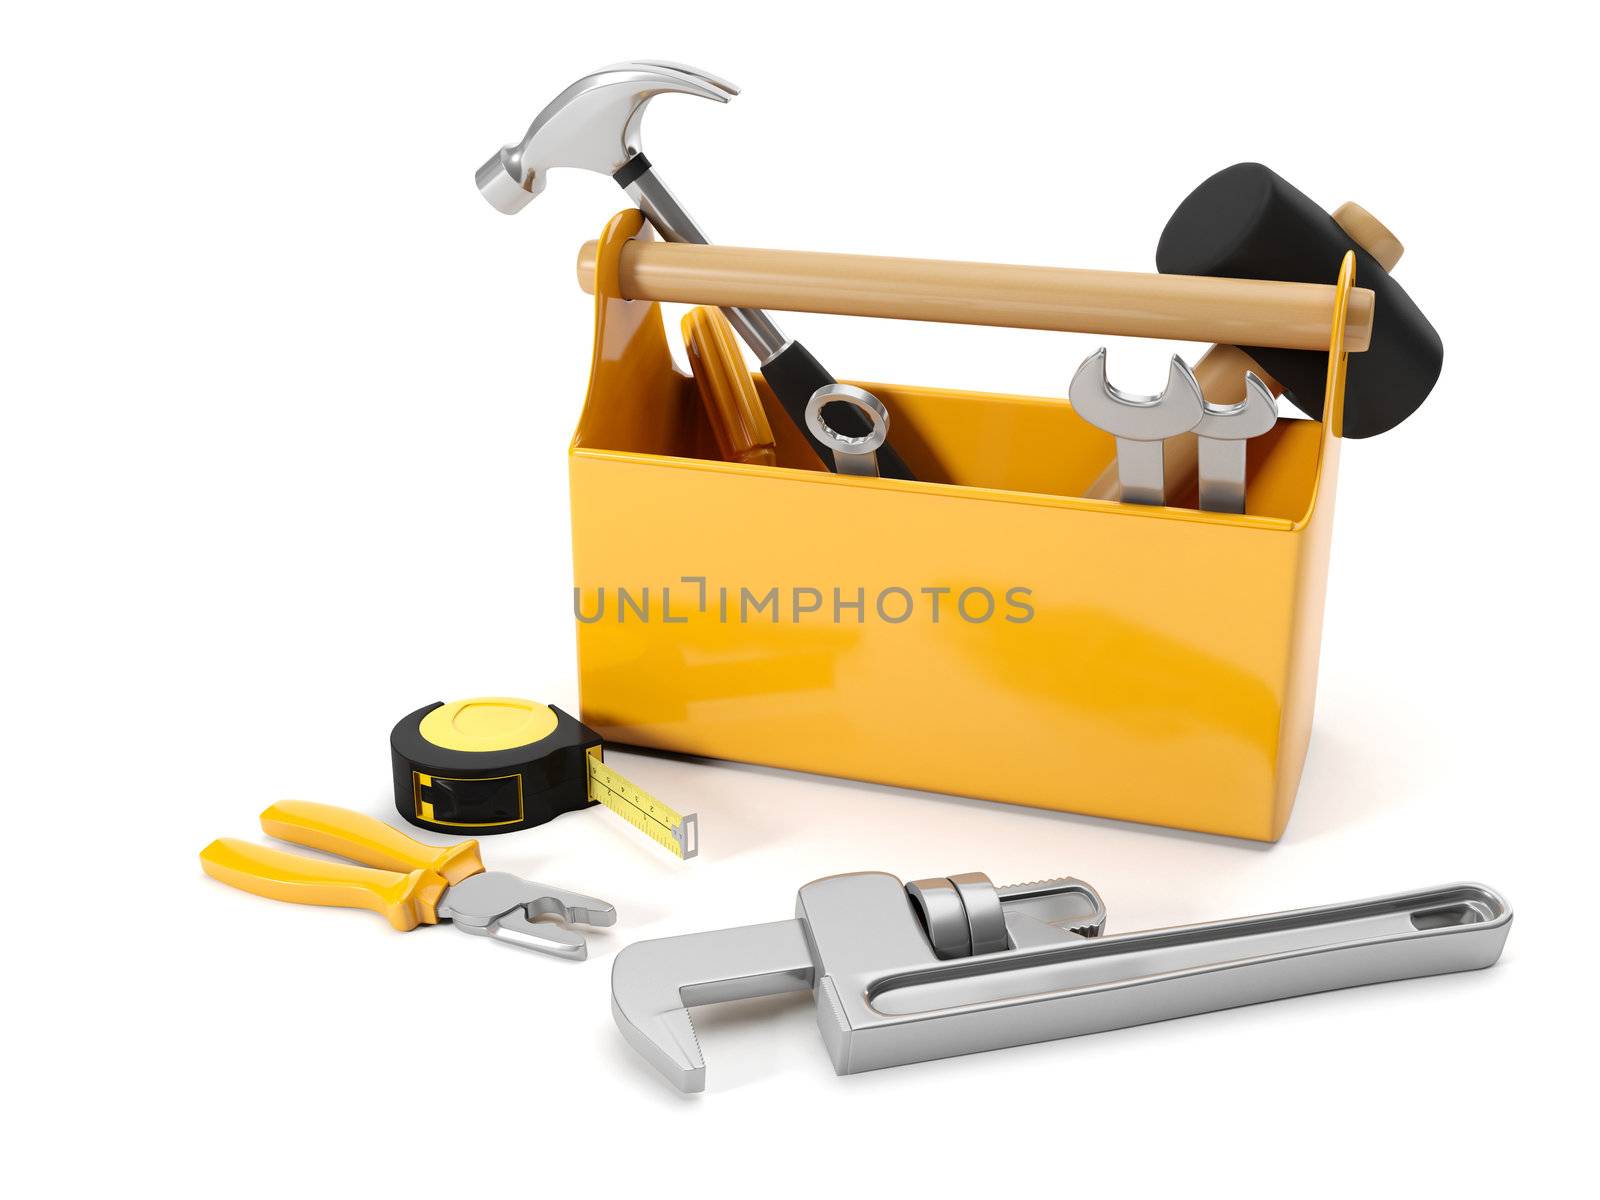 3d illustration: repair services. Tool box on a white background by kolobsek